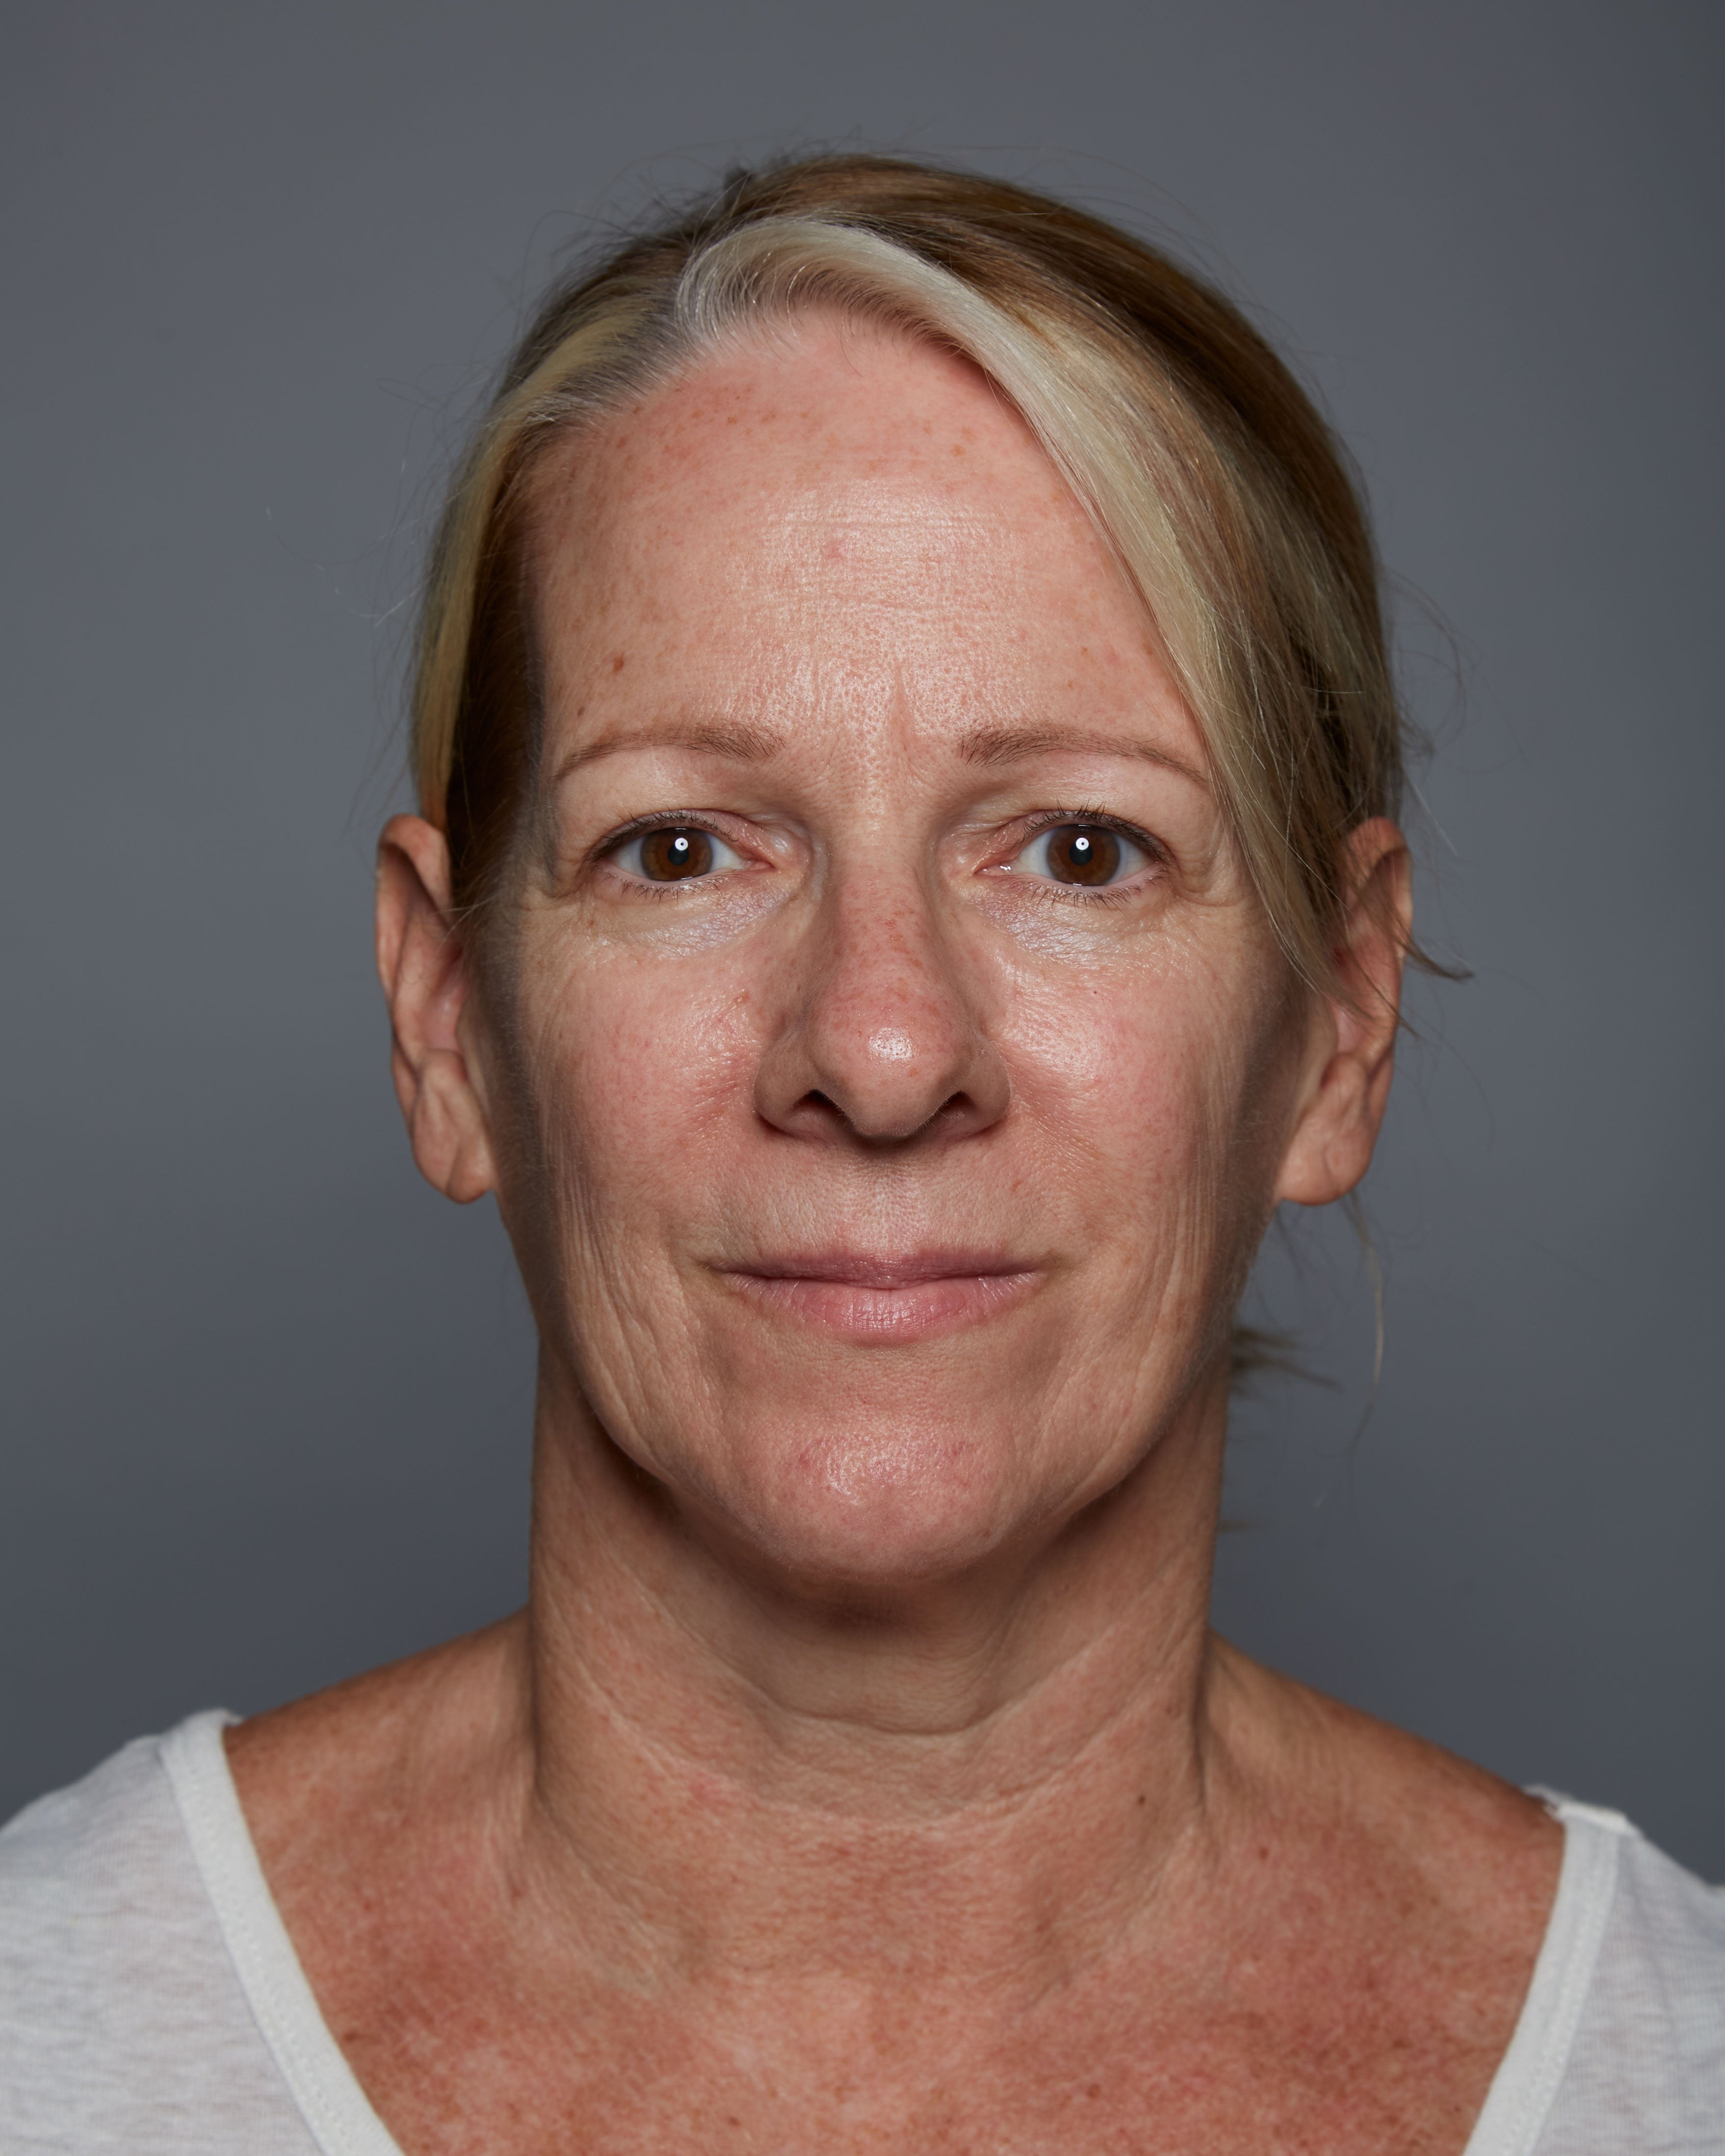 "After" headshot of a clinical subject who has used Michal Morrison Genesis BSTEM6 Molecular Serum, showing a white woman with blonde hair smiling at camera.